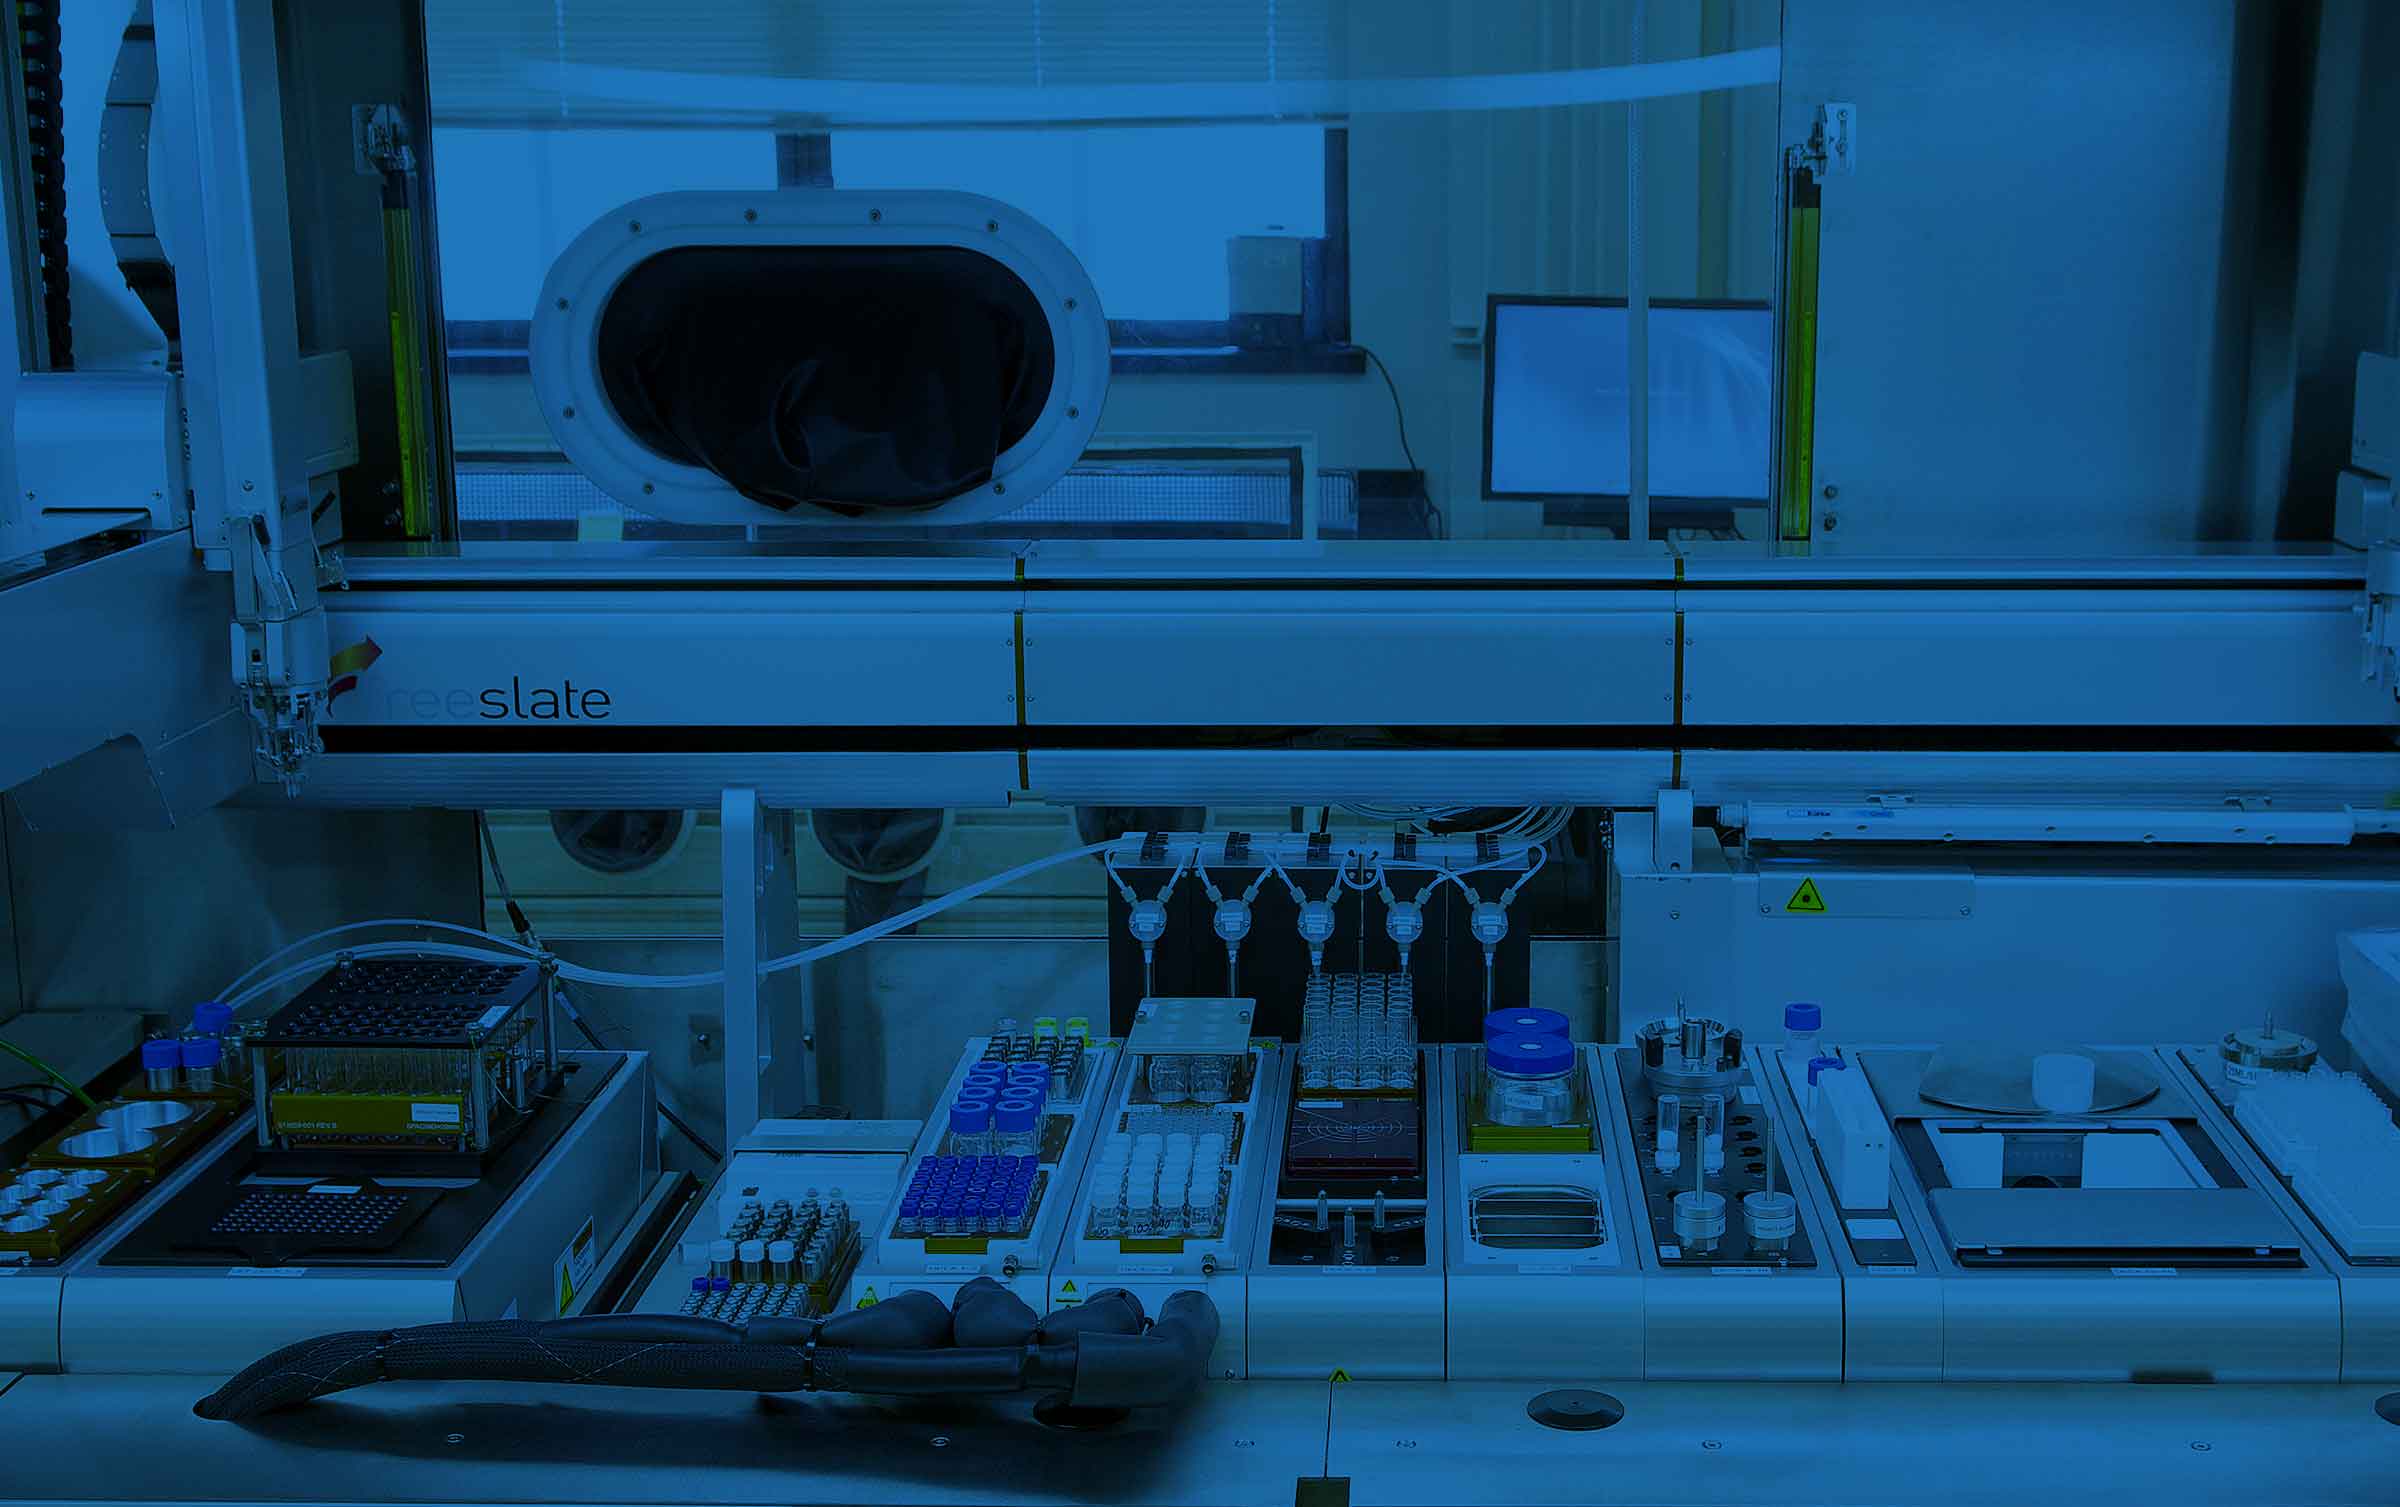 An image of a machine used in a laboratory